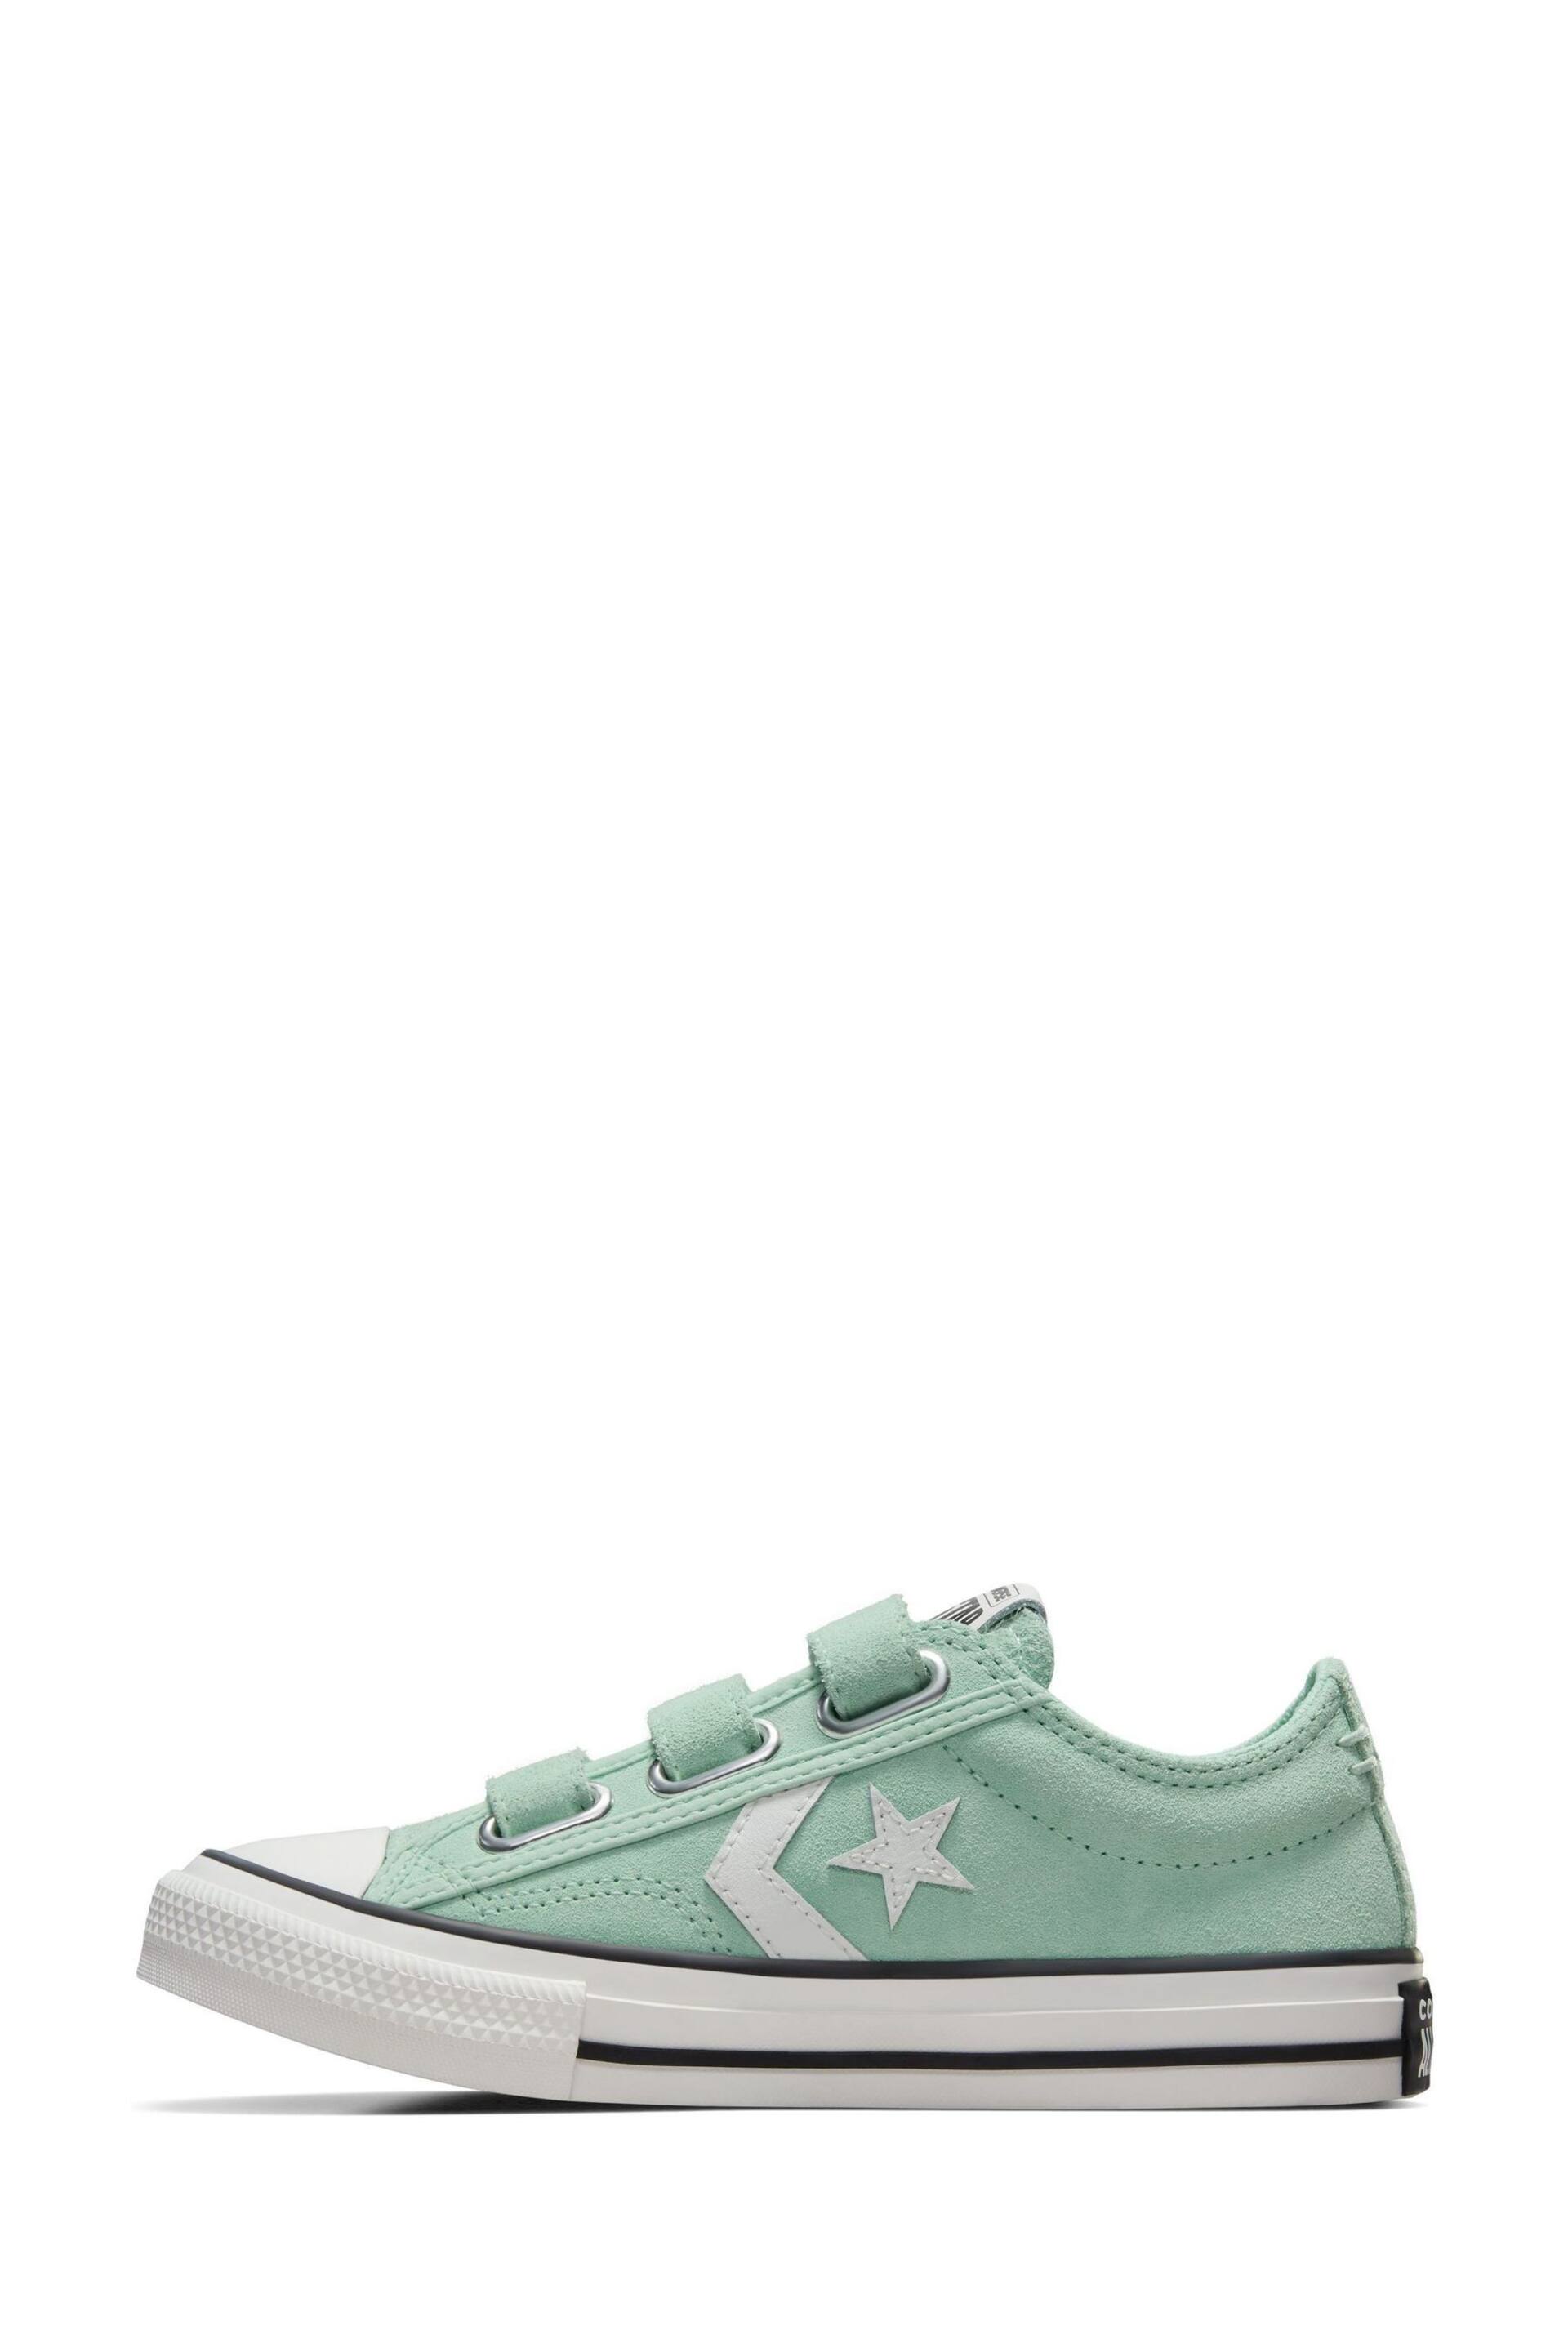 Converse Green Junior Star Player 76 3V Trainers - Image 8 of 9